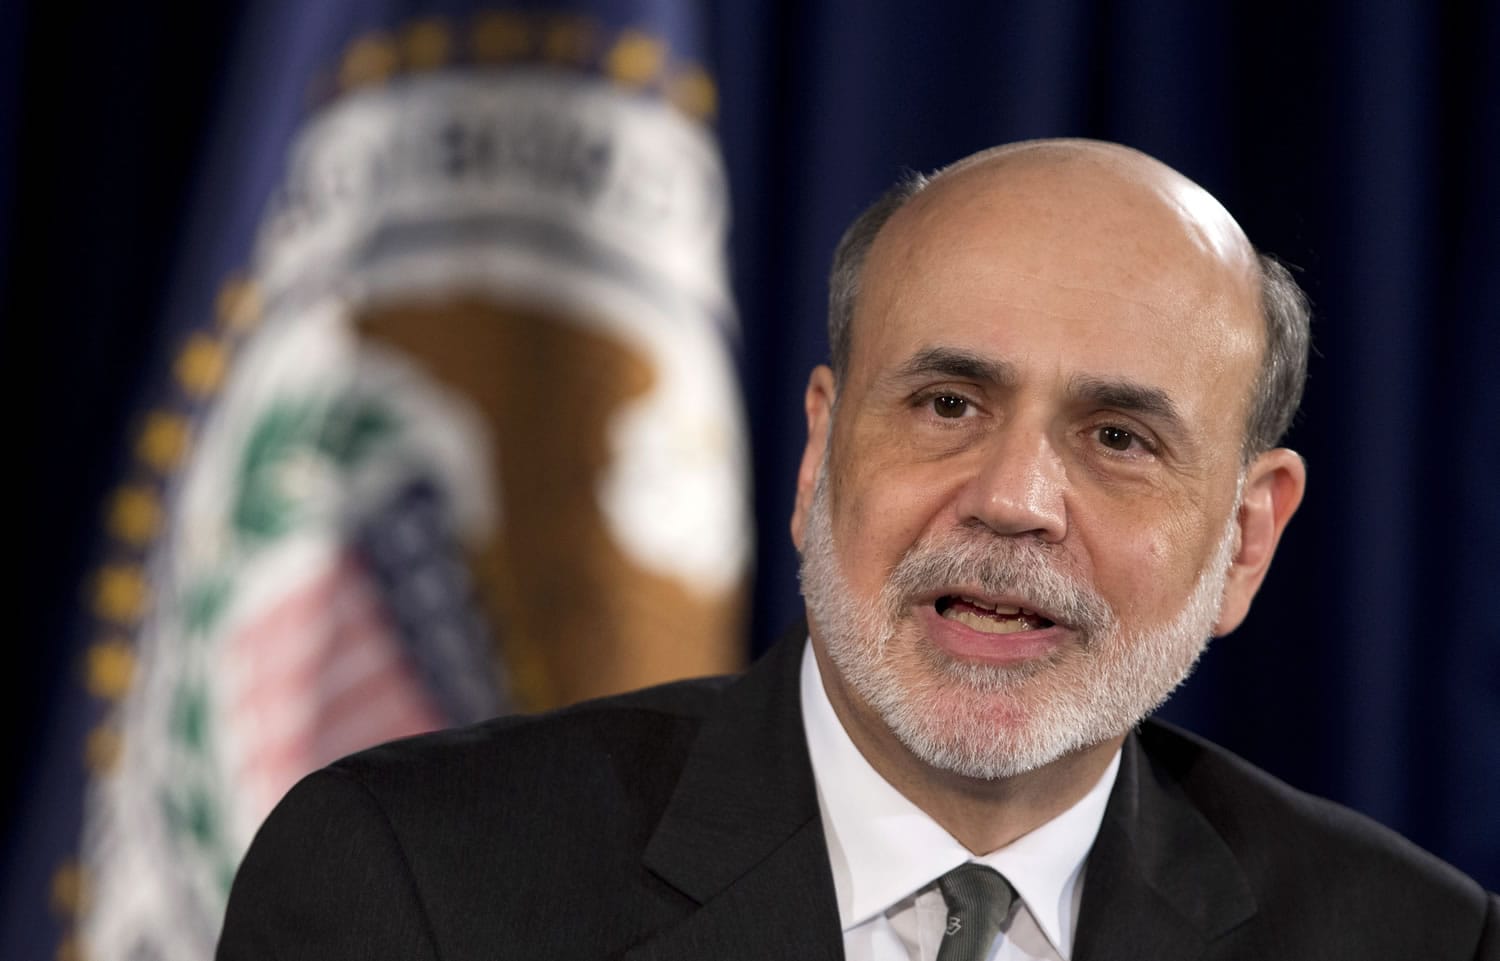 Federal Reserve Chairman Ben Bernanke speaks during a news conference in Washington on Thursday.